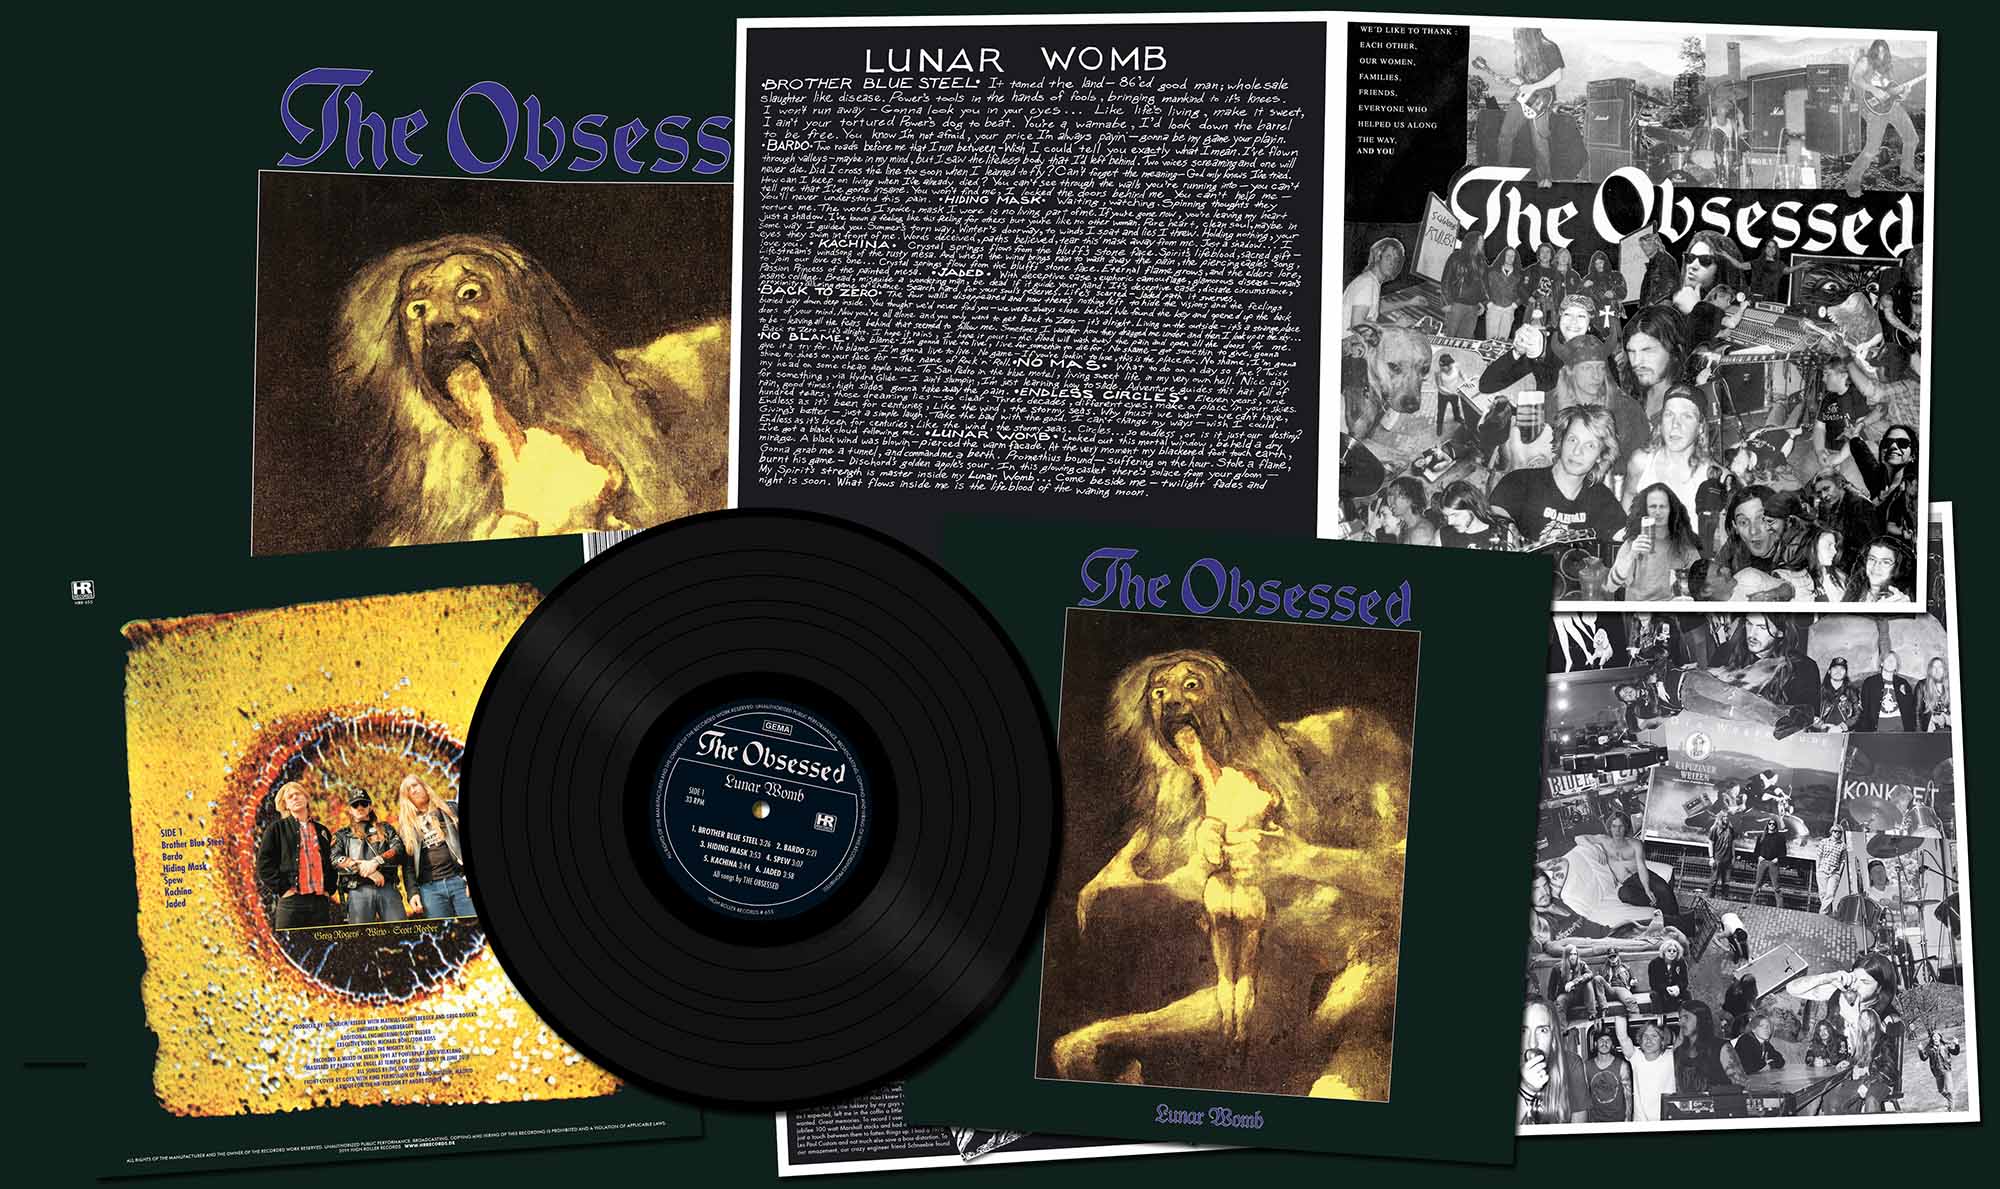 THE OBSESSED - Lunar Womb  LP